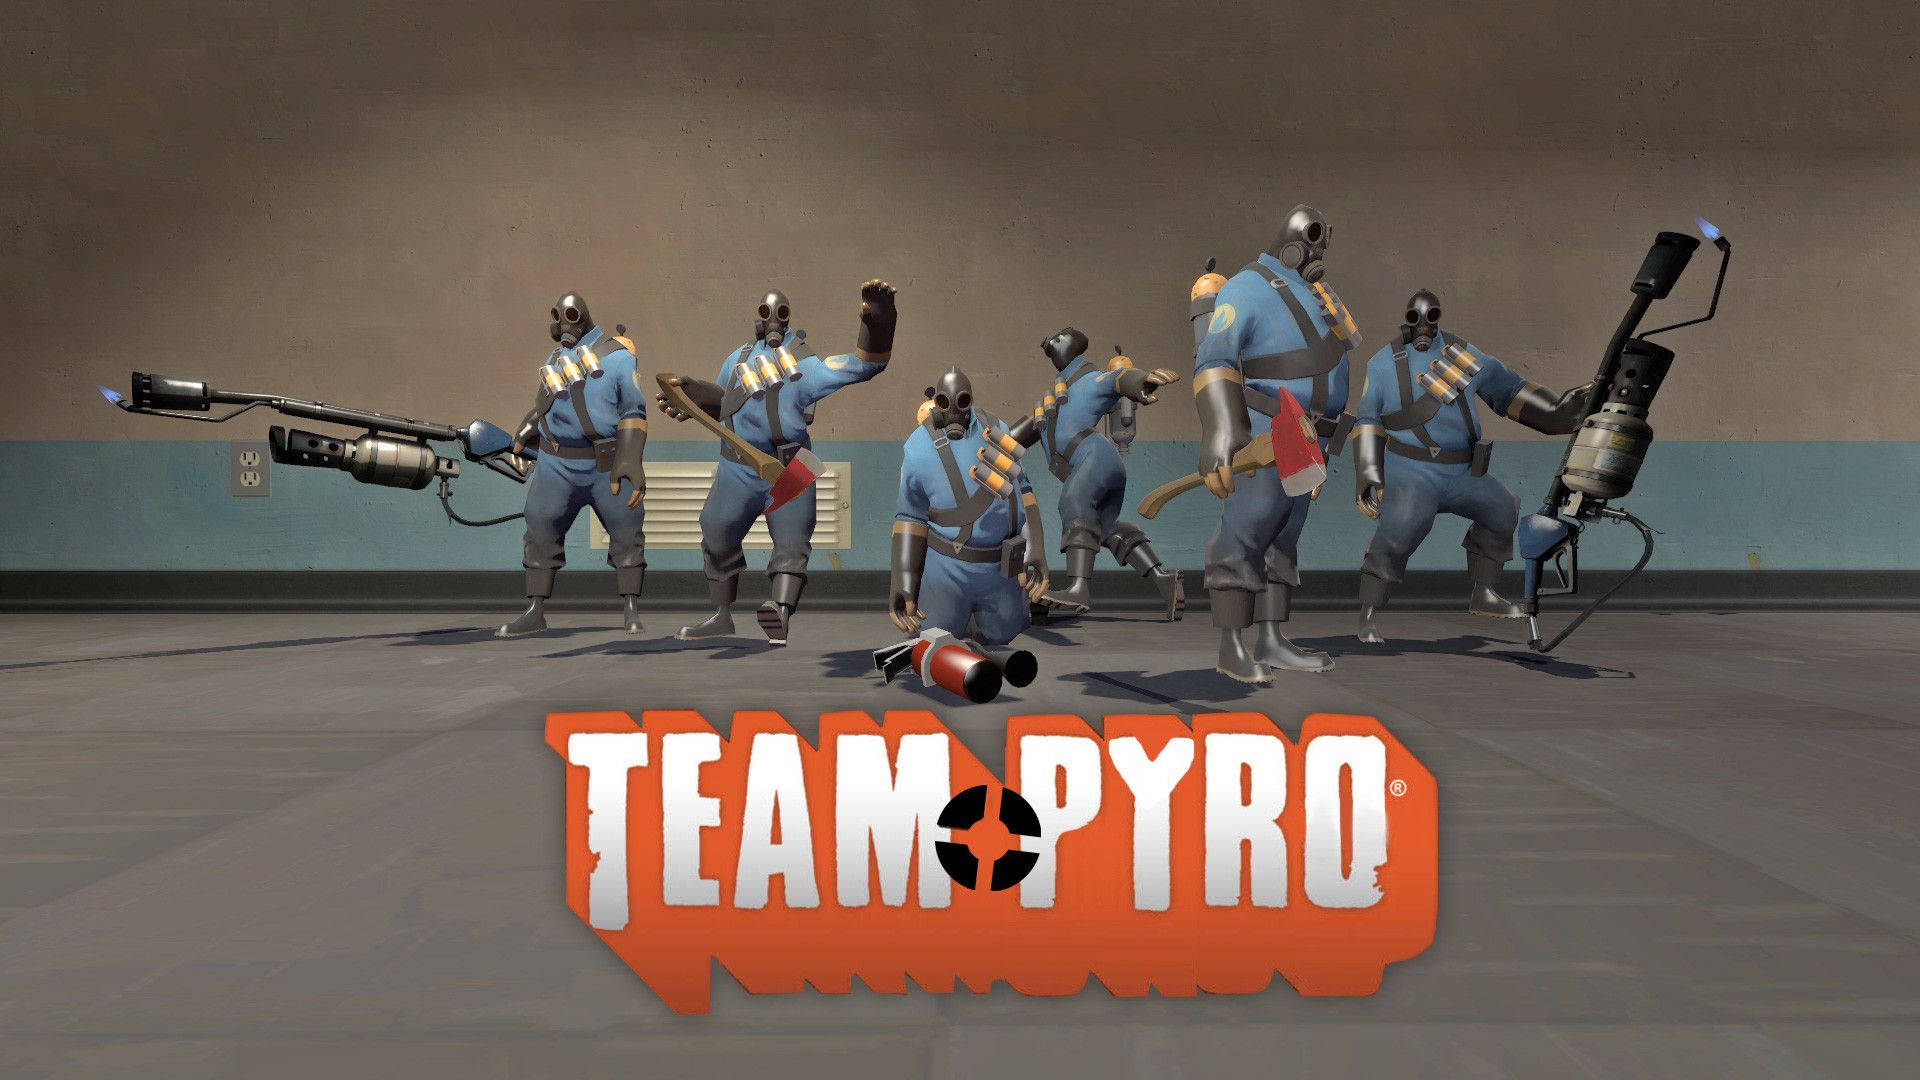 Lag Fortress 2 Pyrospelare (team Fortress 2 Pyro Players) Wallpaper